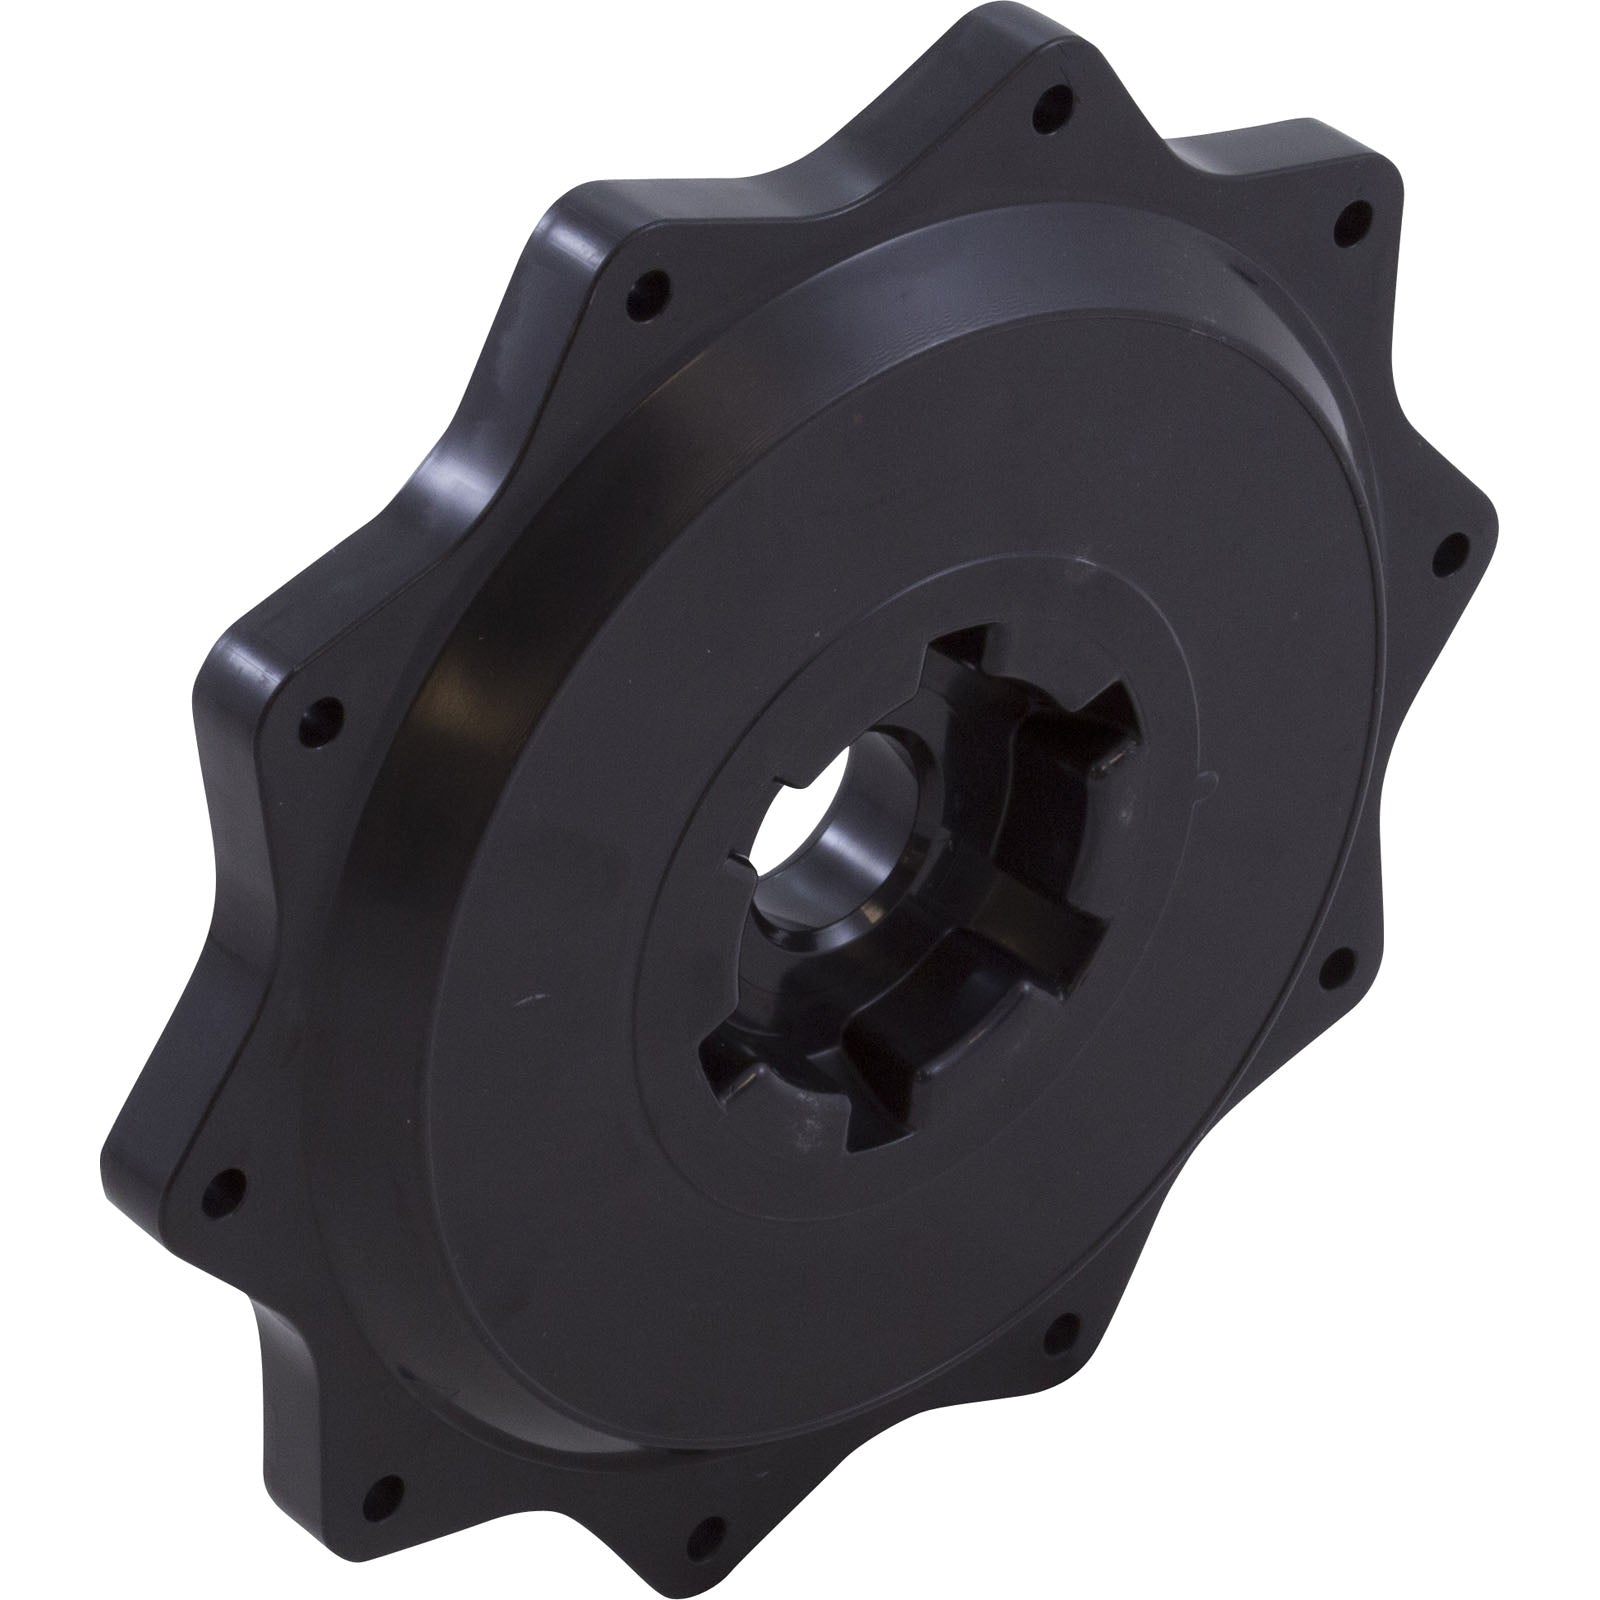 Cover, Pentair PacFab /2" Top/Side Mount Valve, Black- 271169